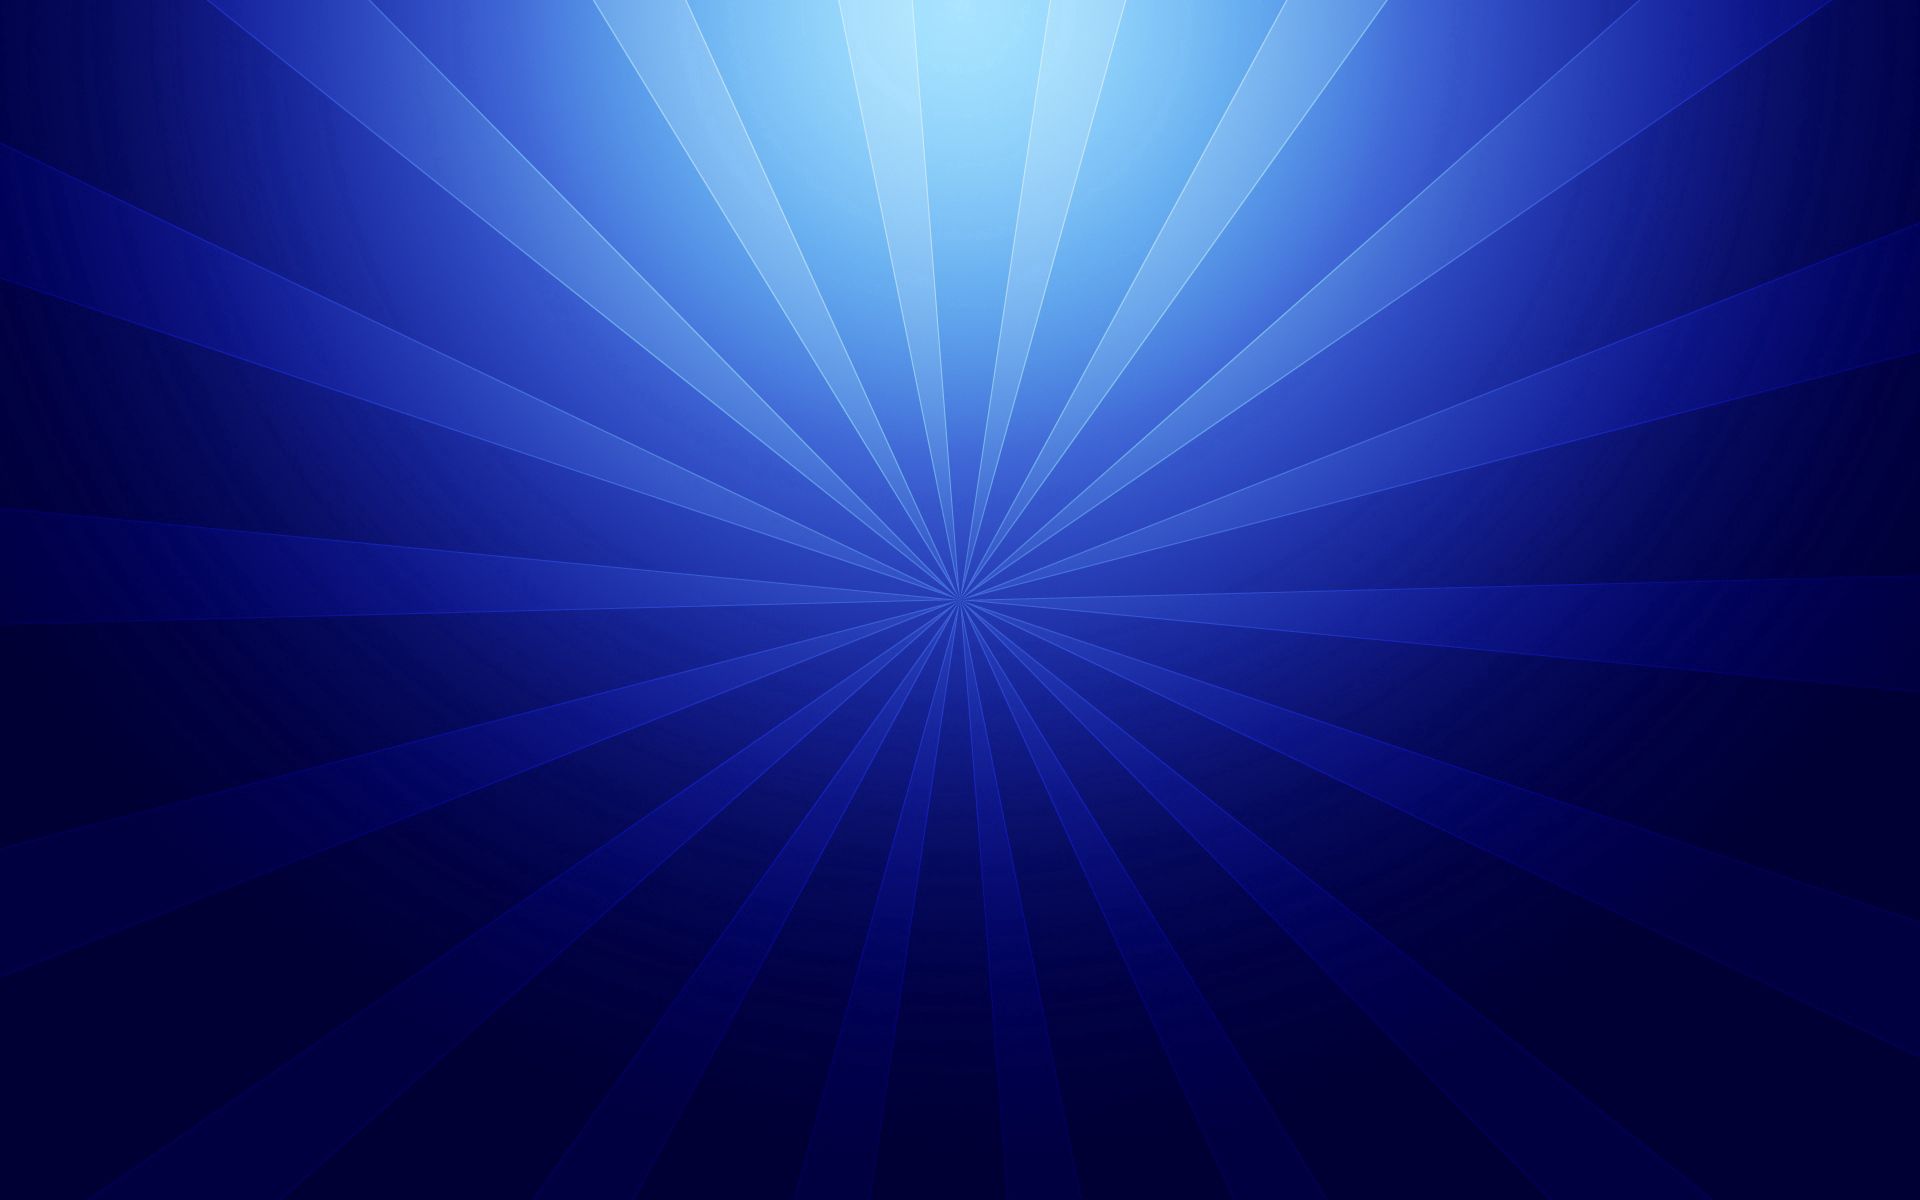 150334 free download Blue wallpapers for phone, abstract, beams, lines, background Blue images and screensavers for mobile